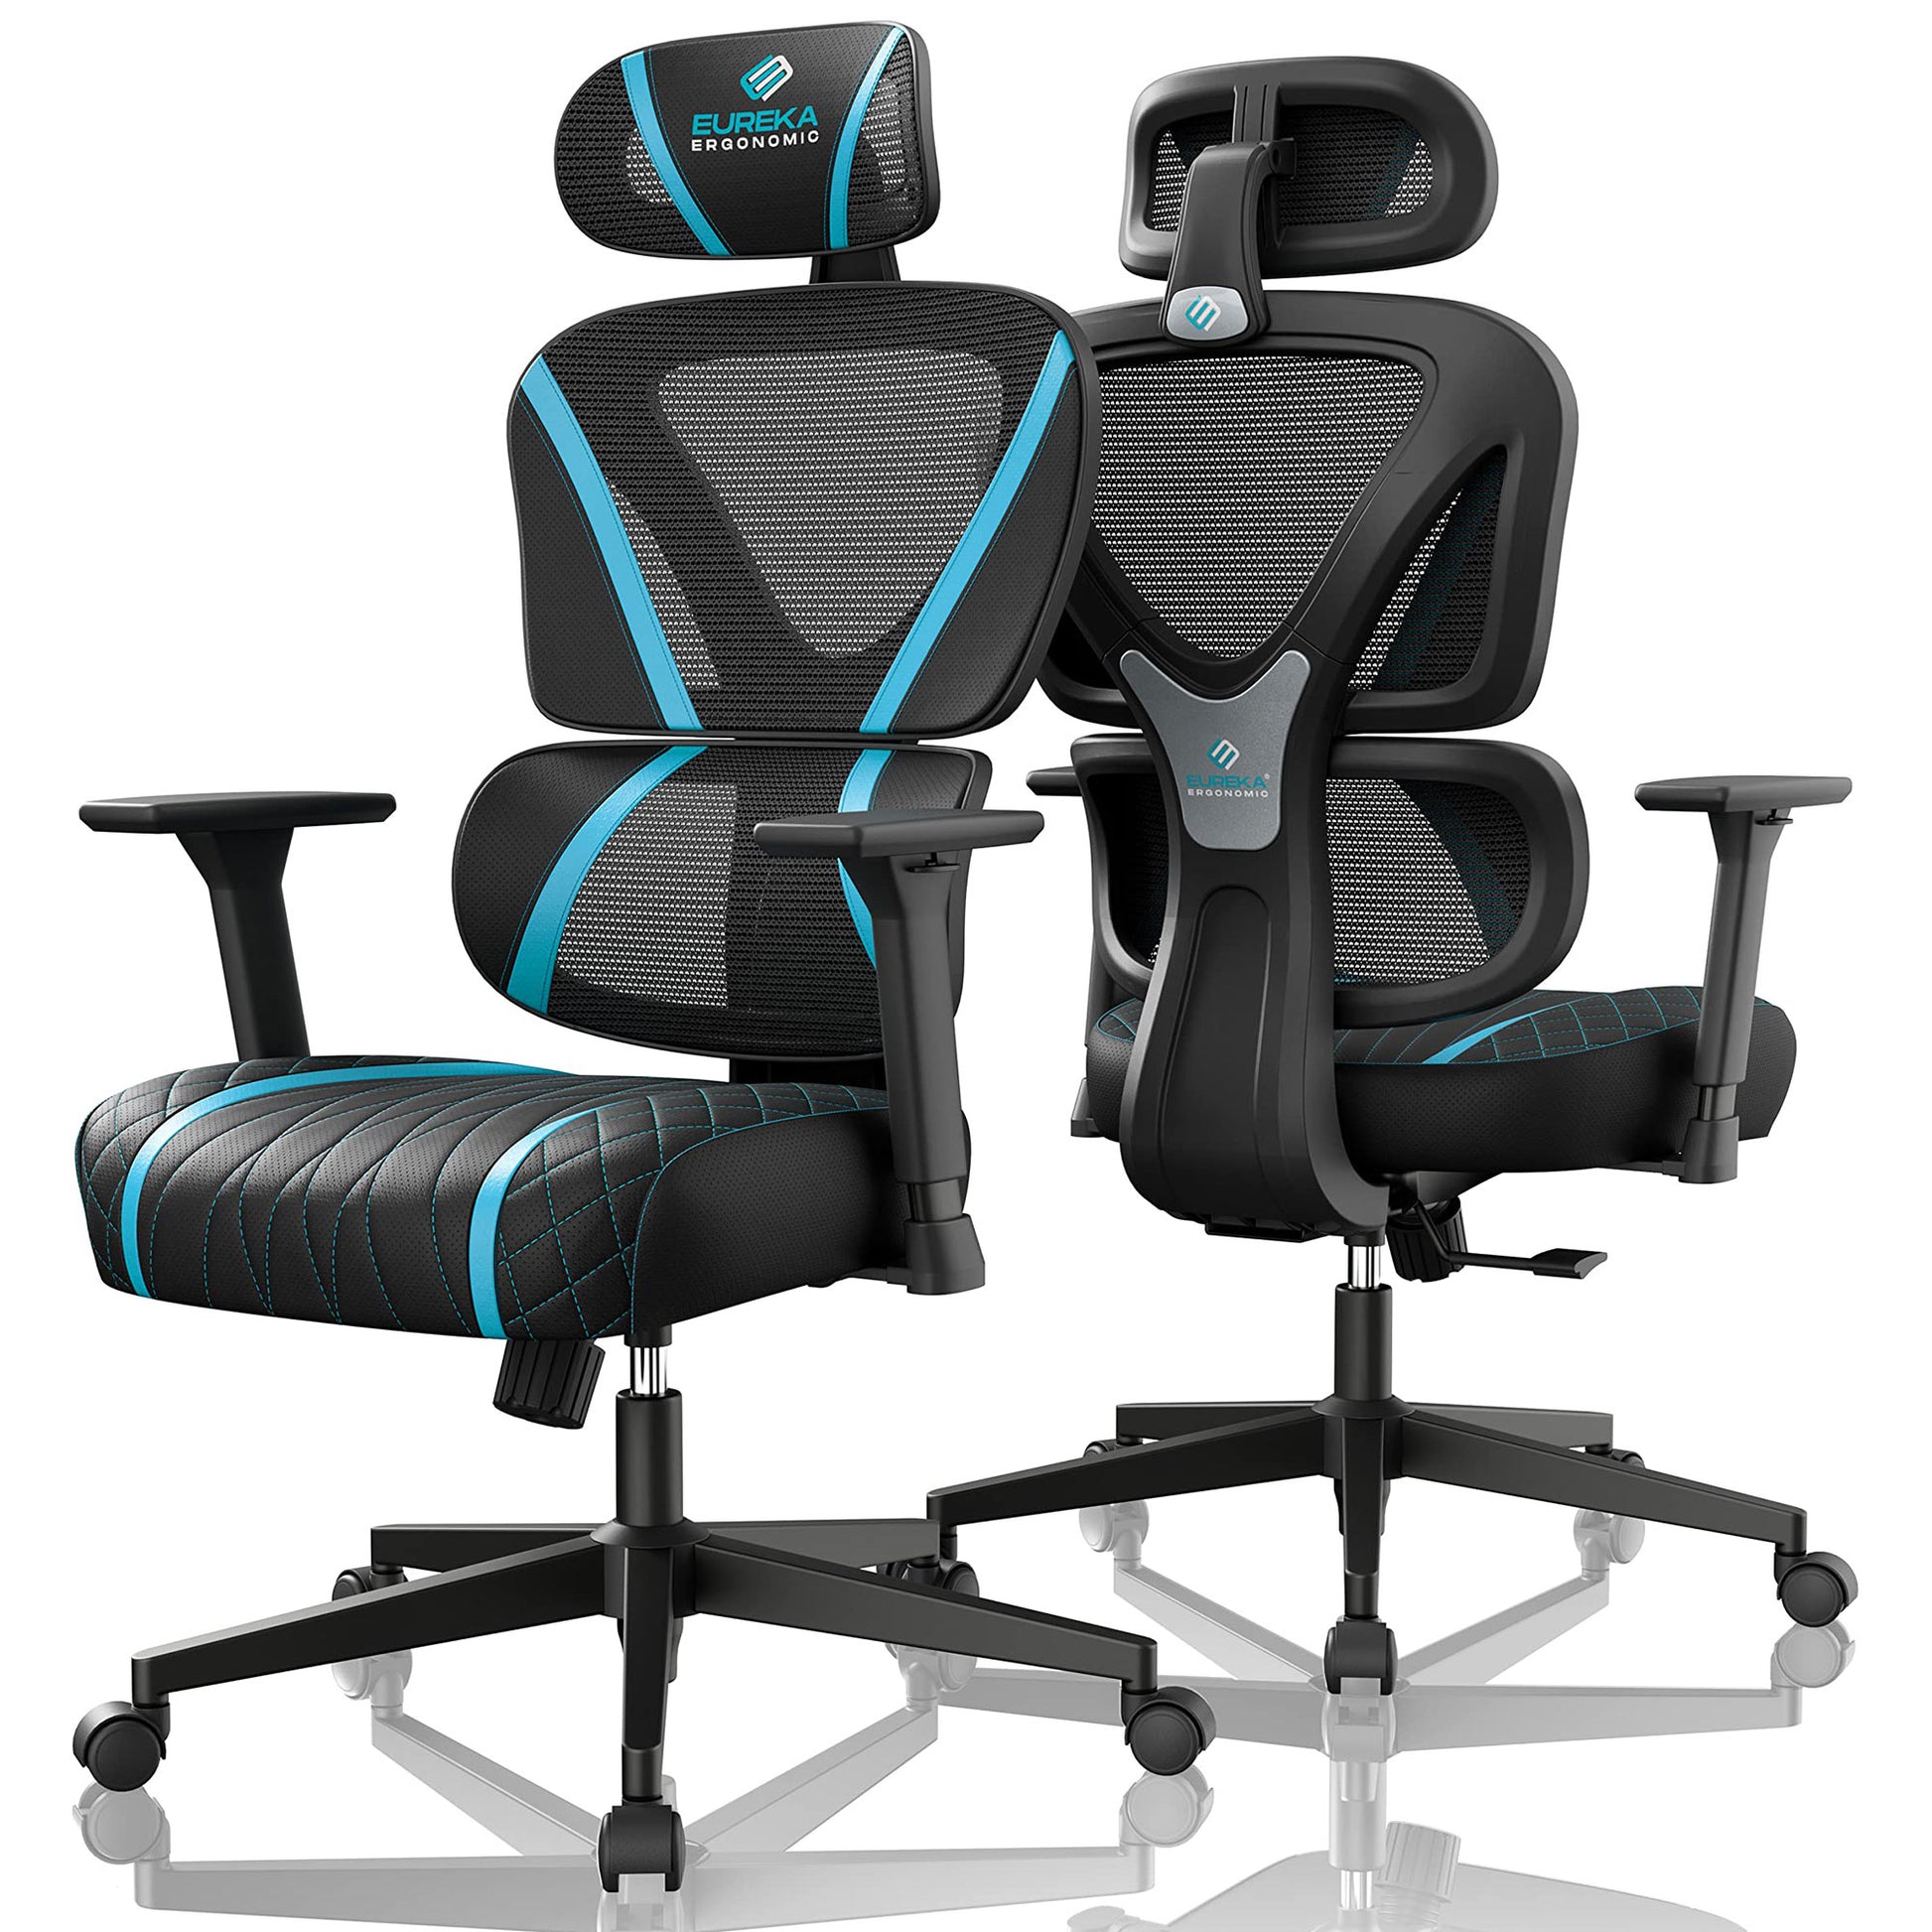 Nrom,Gaming office comfy ergonomic chair, Blue